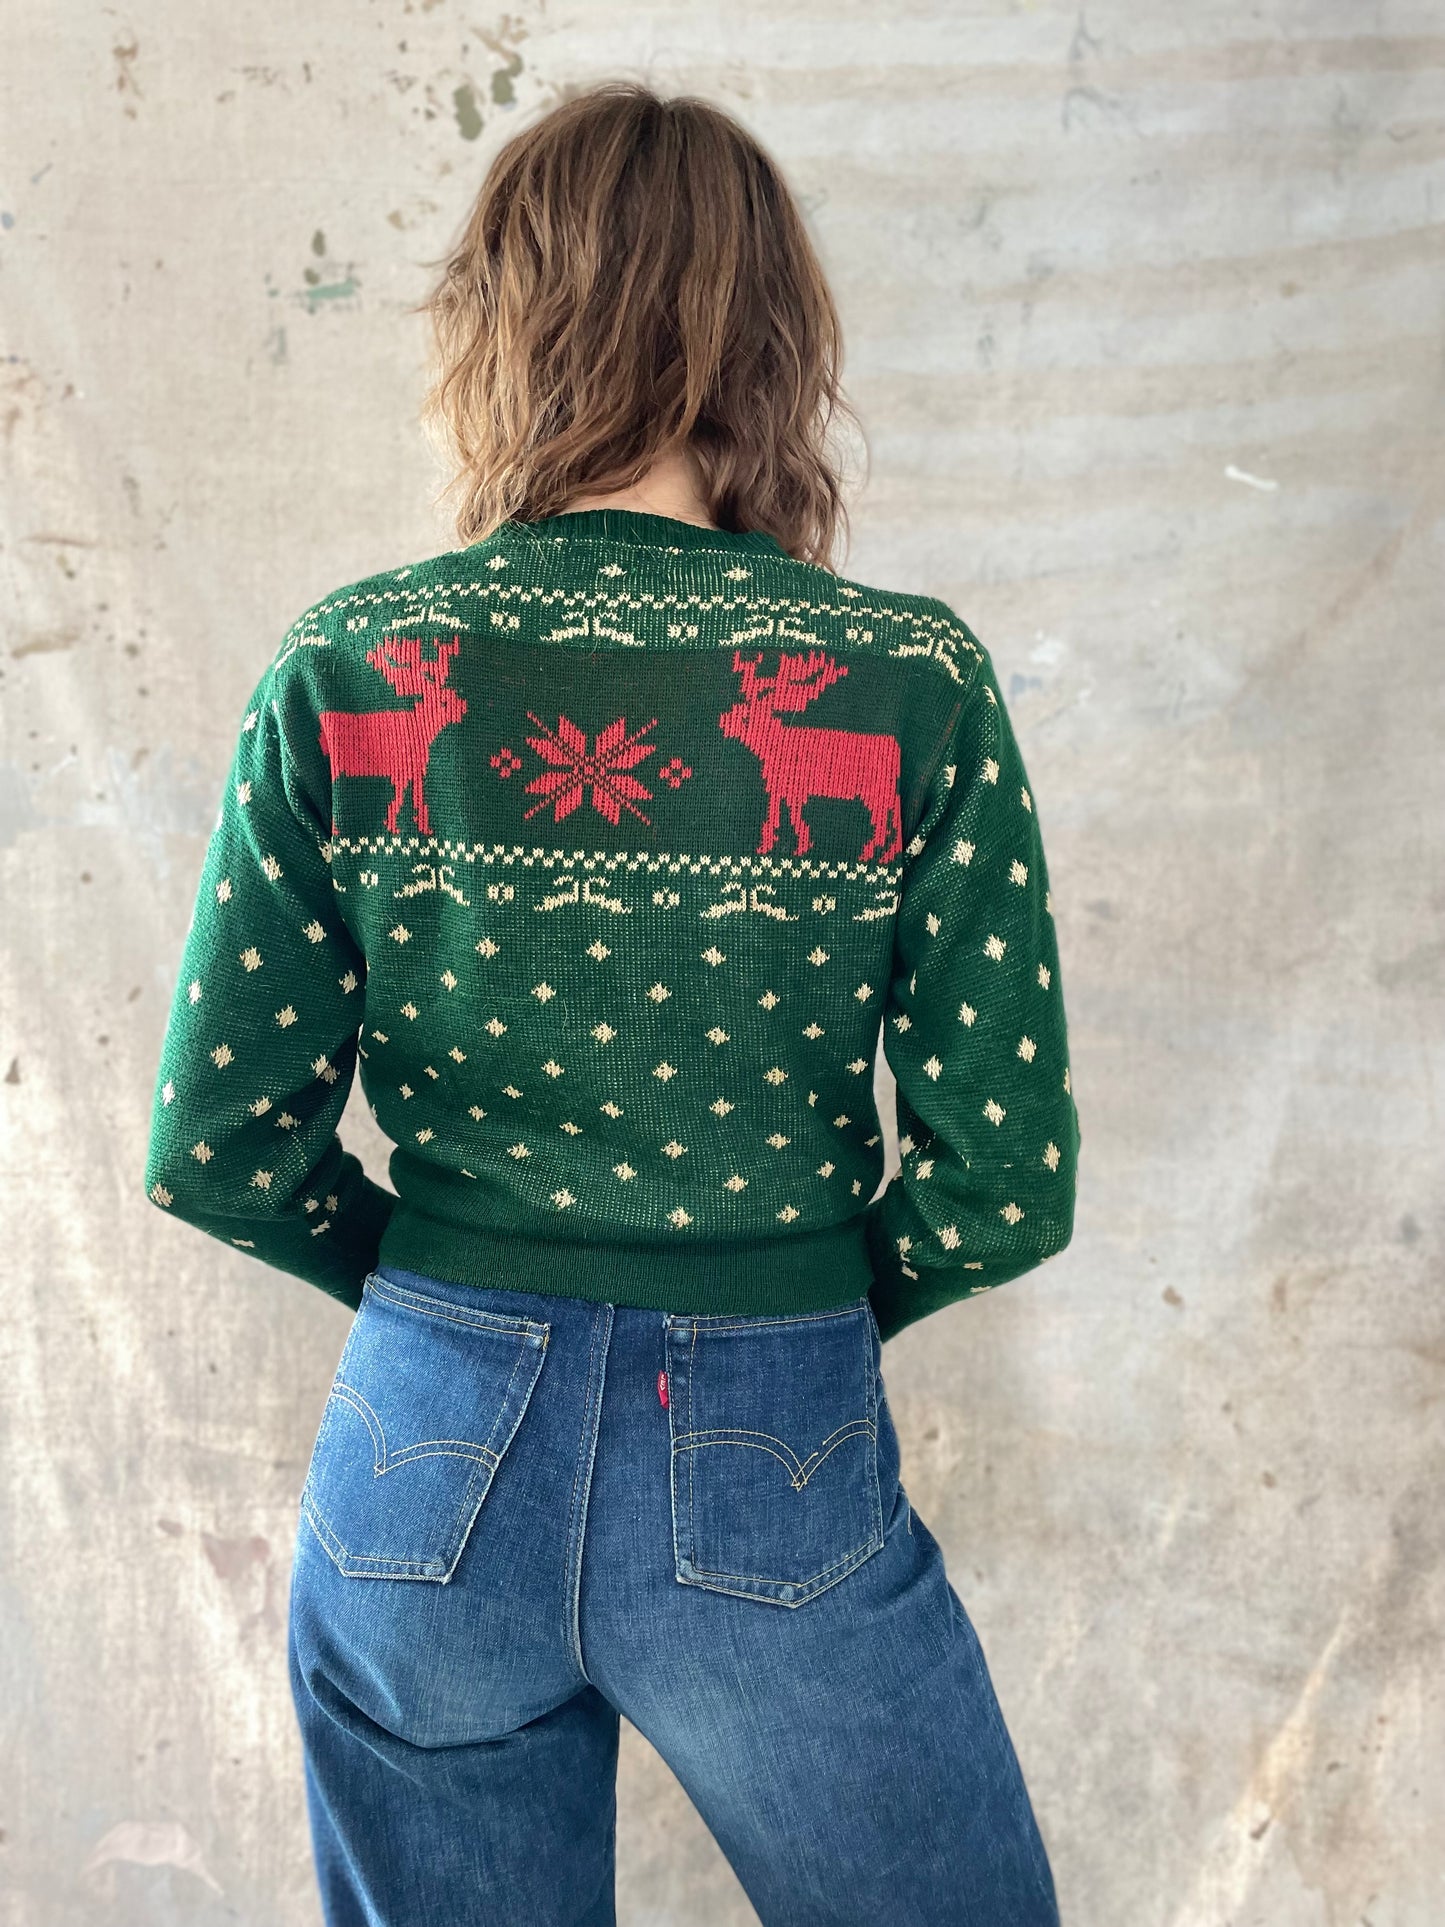 40s/50s Holiday Reindeer Sweater